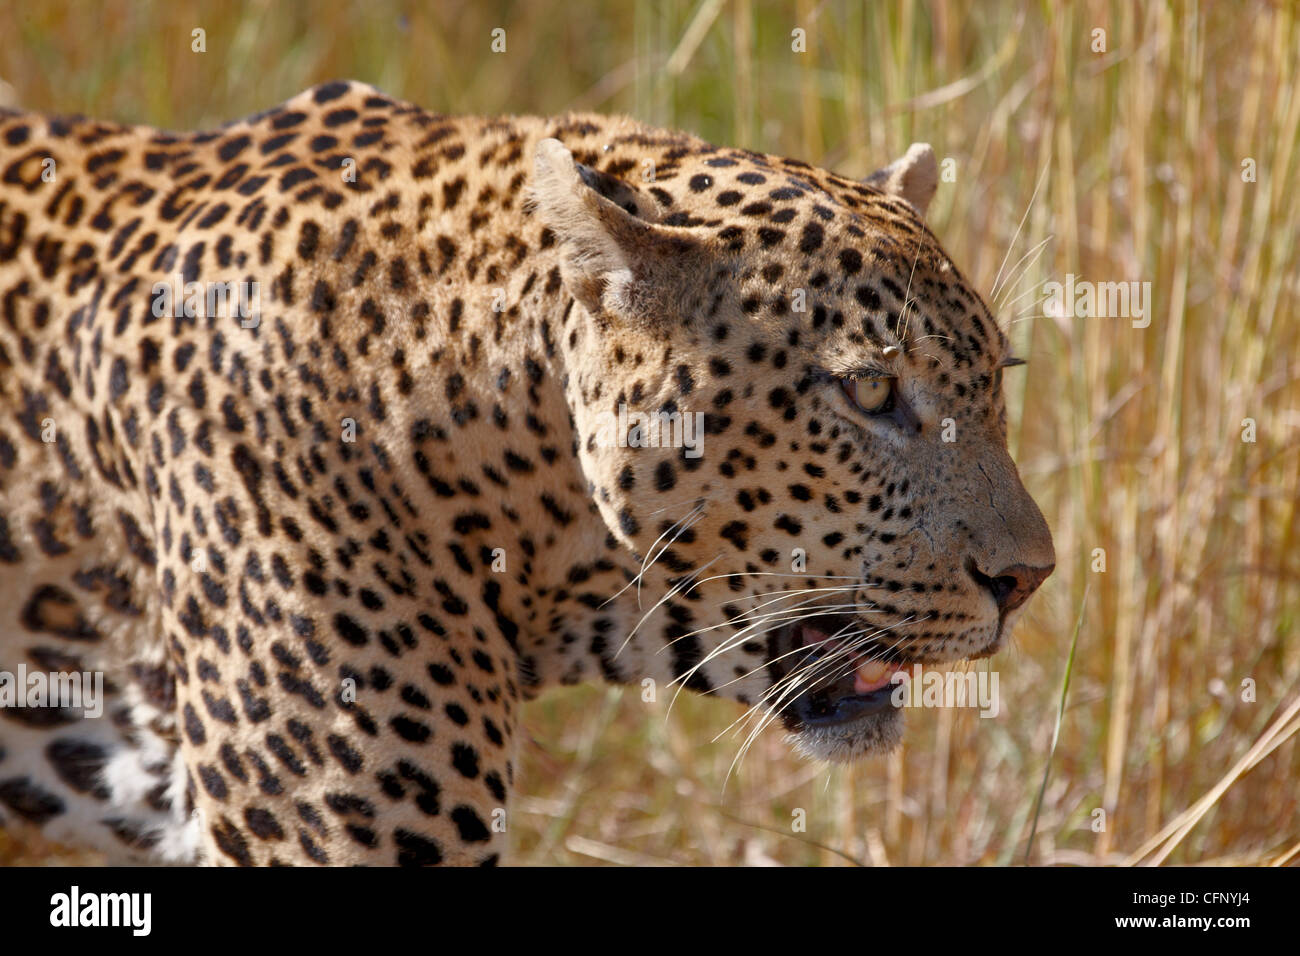 Male leopard (Panthera pardus), Kruger National Park, South Africa, Africa Stock Photo